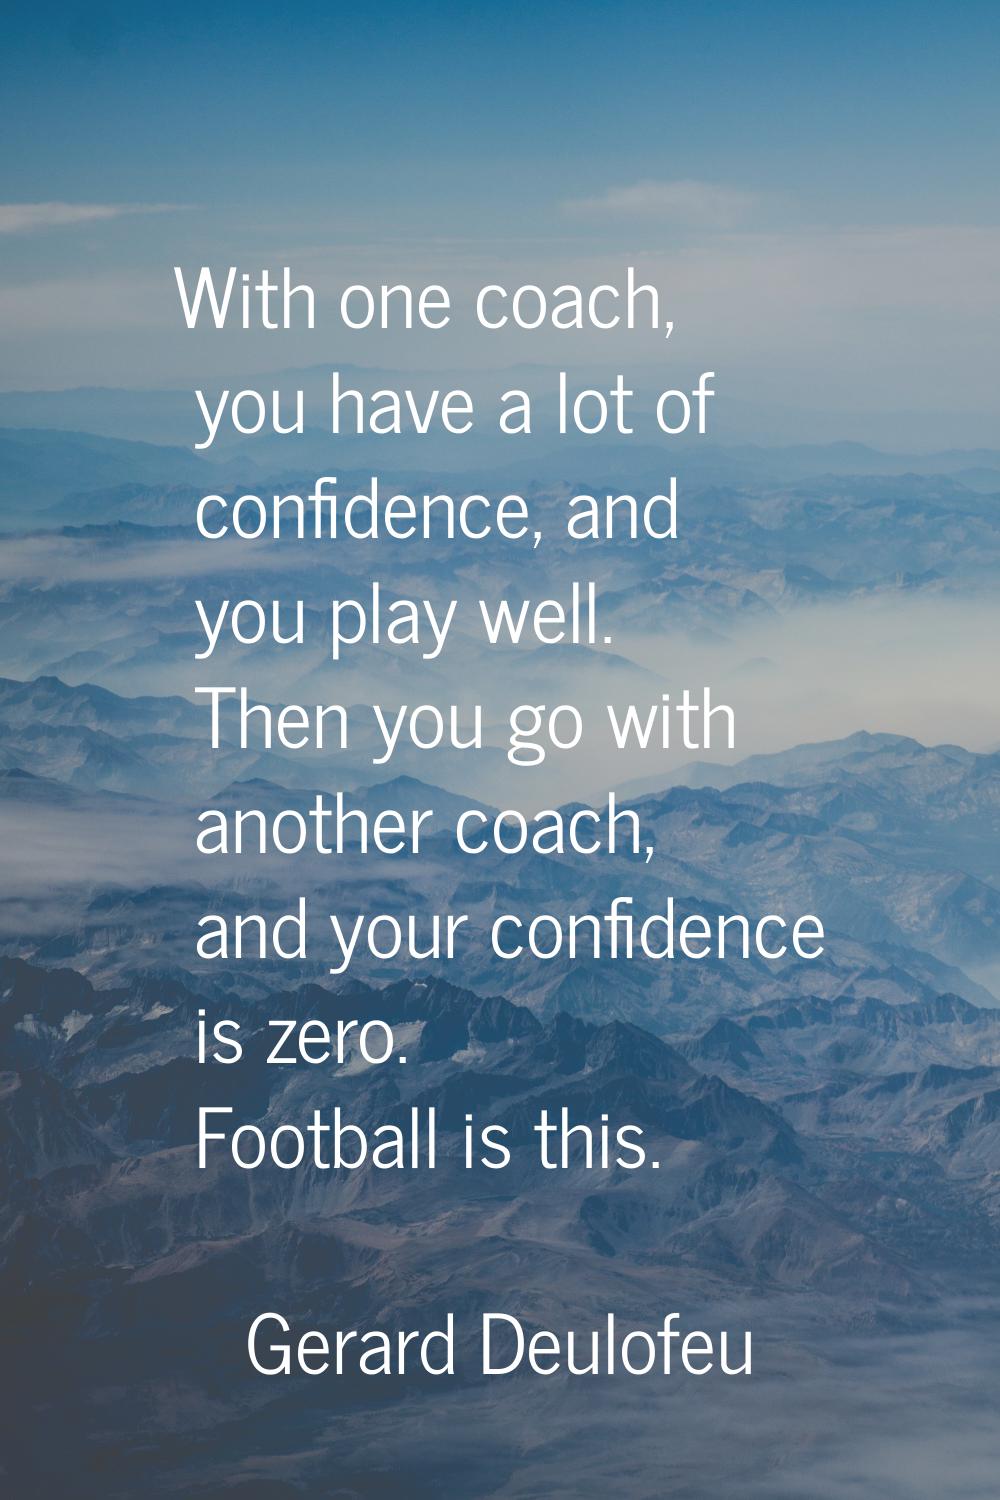 With one coach, you have a lot of confidence, and you play well. Then you go with another coach, an